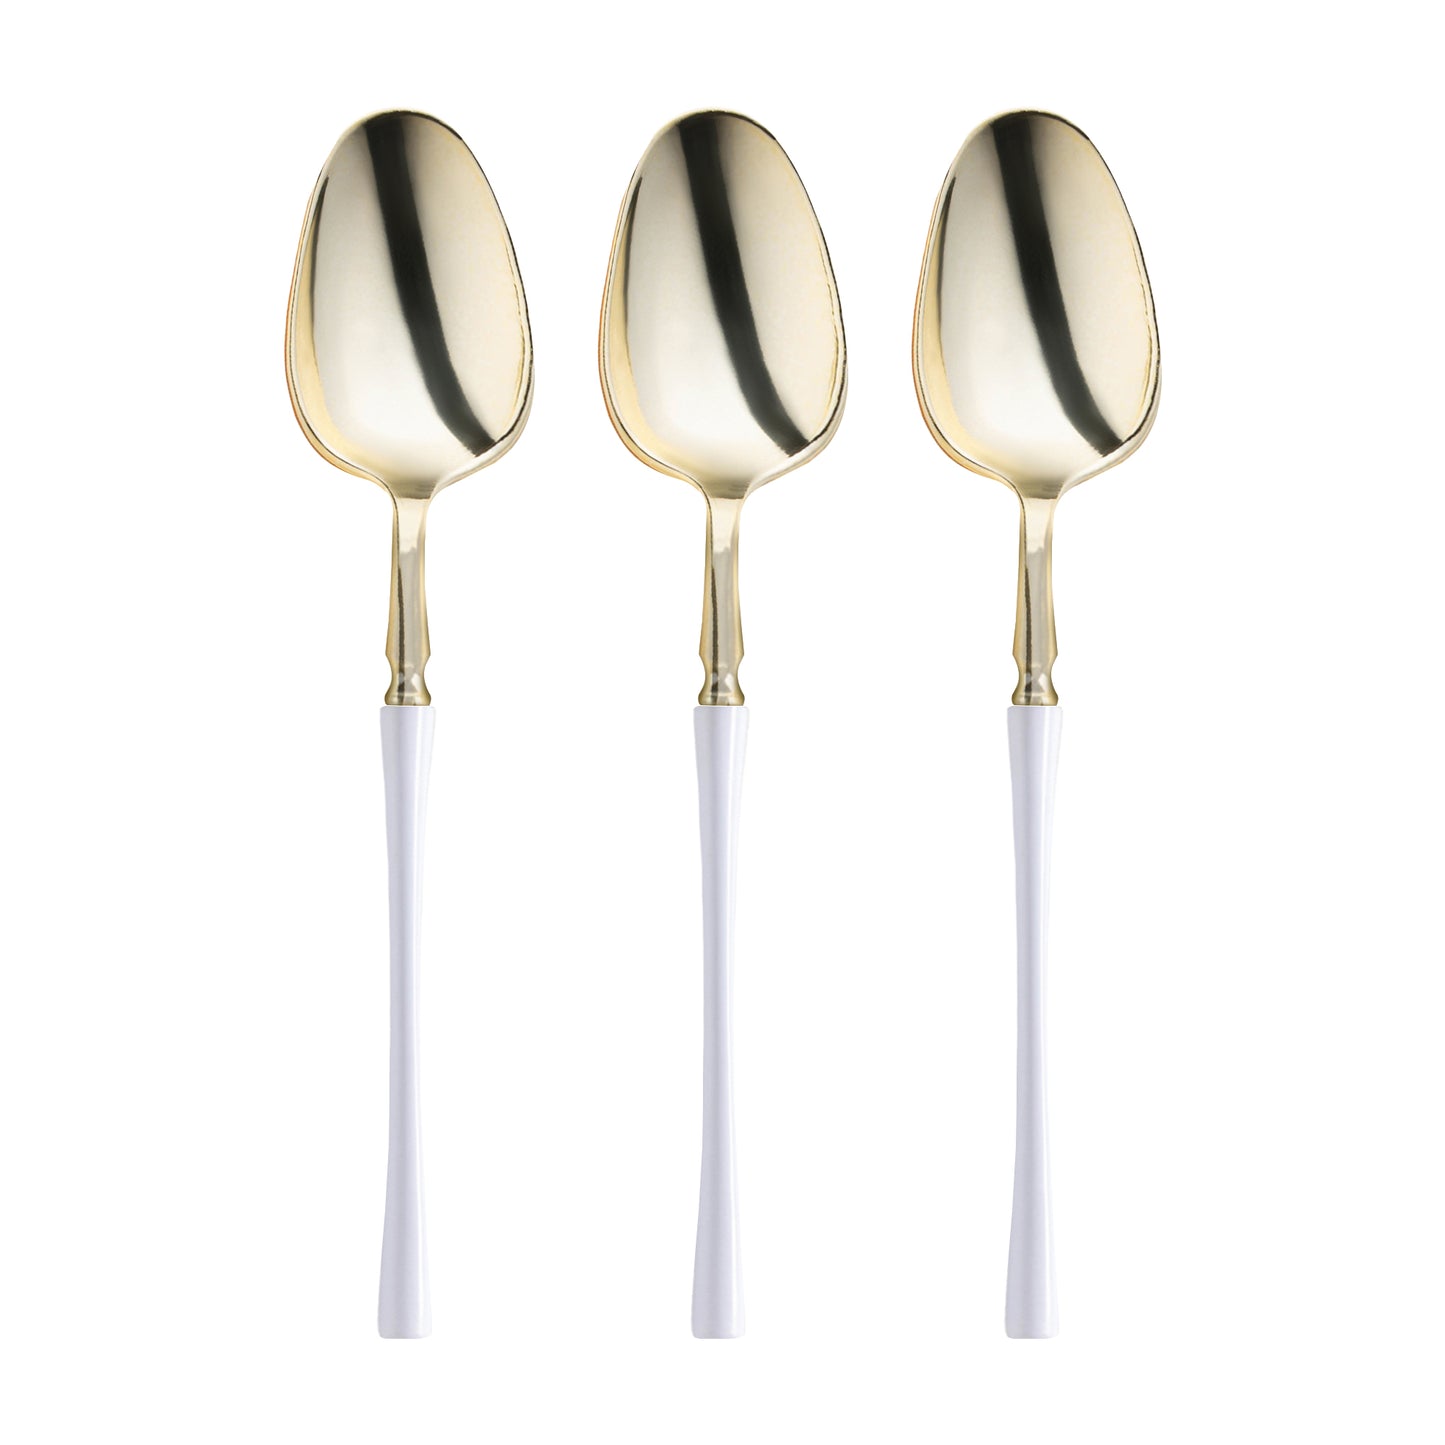 Shiny Gold with White Handle Moderno Disposable Plastic Dinner Spoons